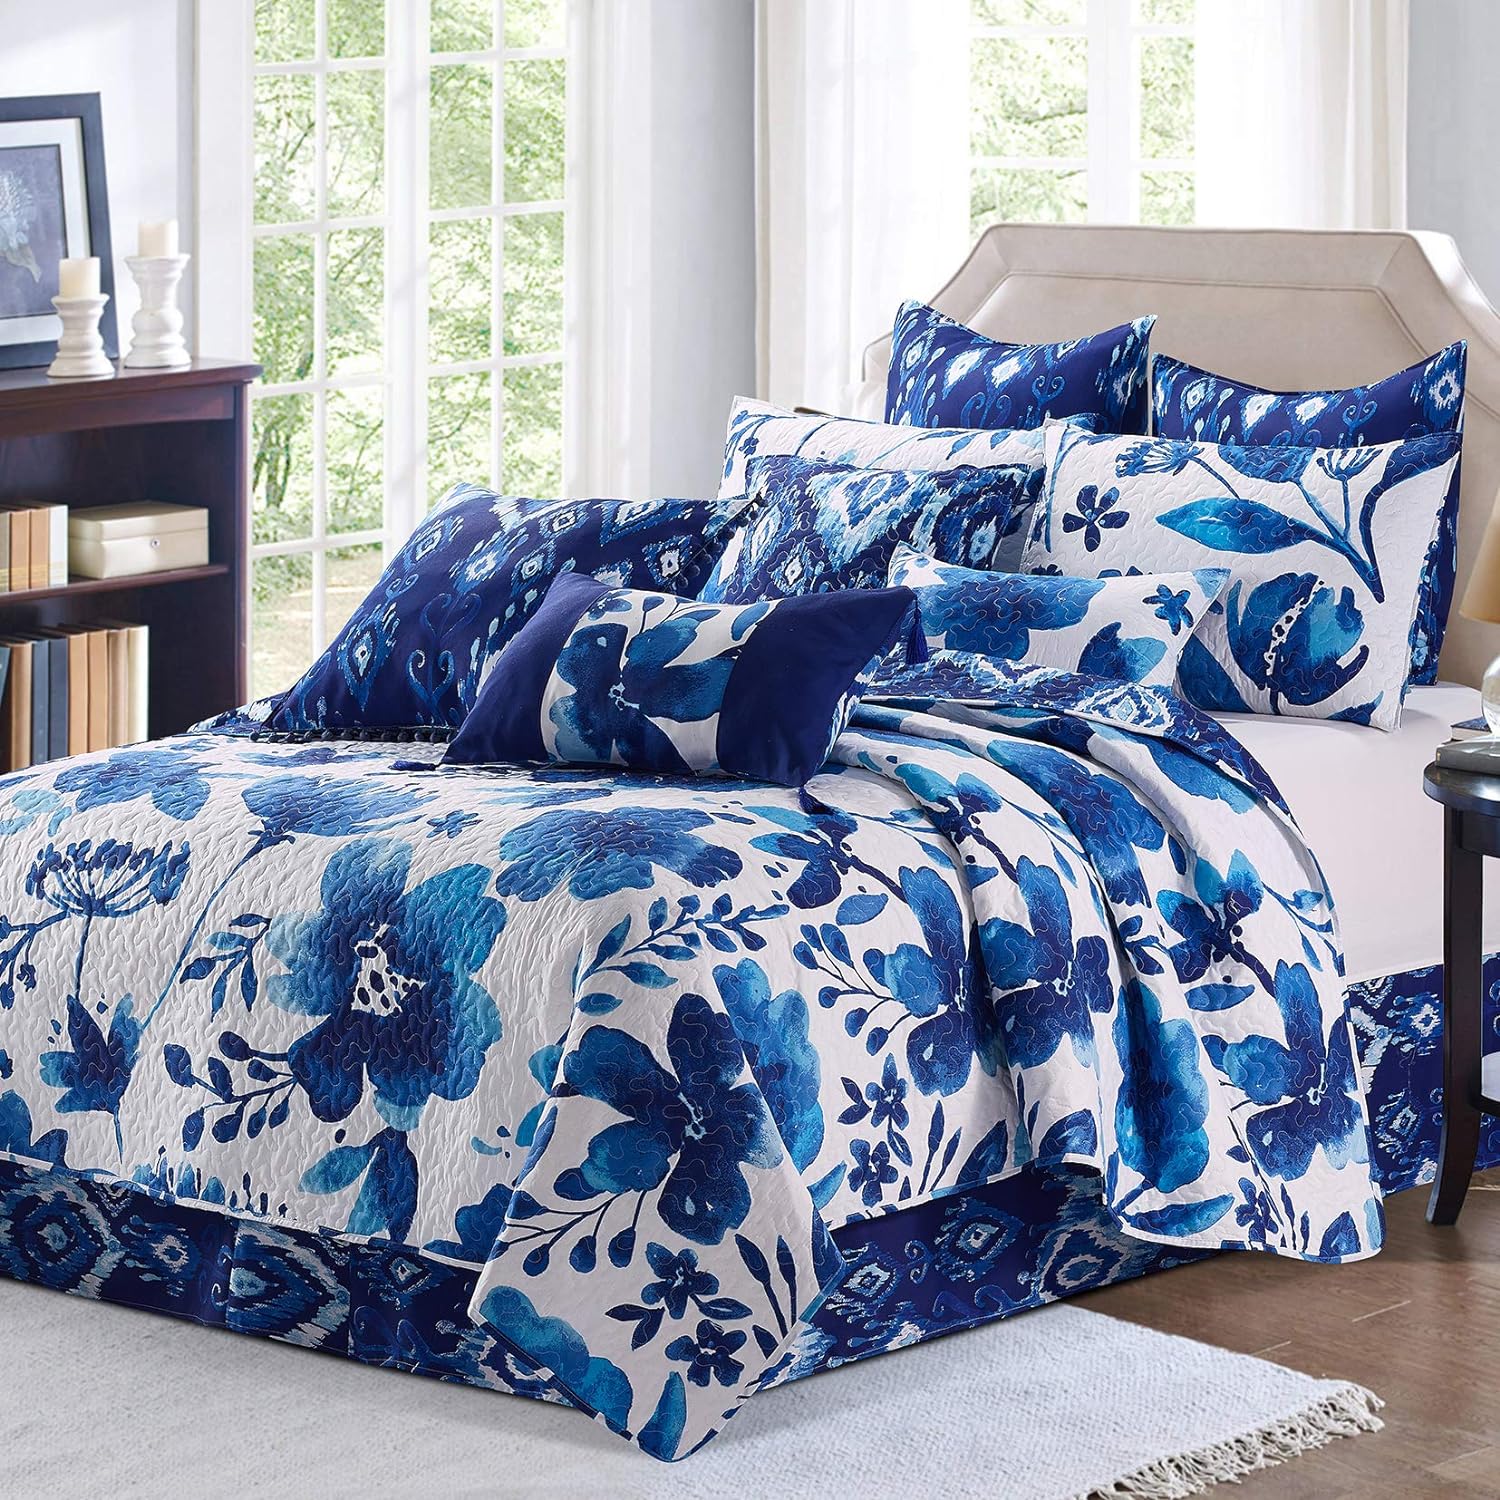 Virah Bella Quilt Bedding Set in Full/Queen Indigo Botanical Printed Lightweight Reversible Quilt with 2 Matching Pillow Shams - Cozy & Beautiful Contemporary-Themed Bedding